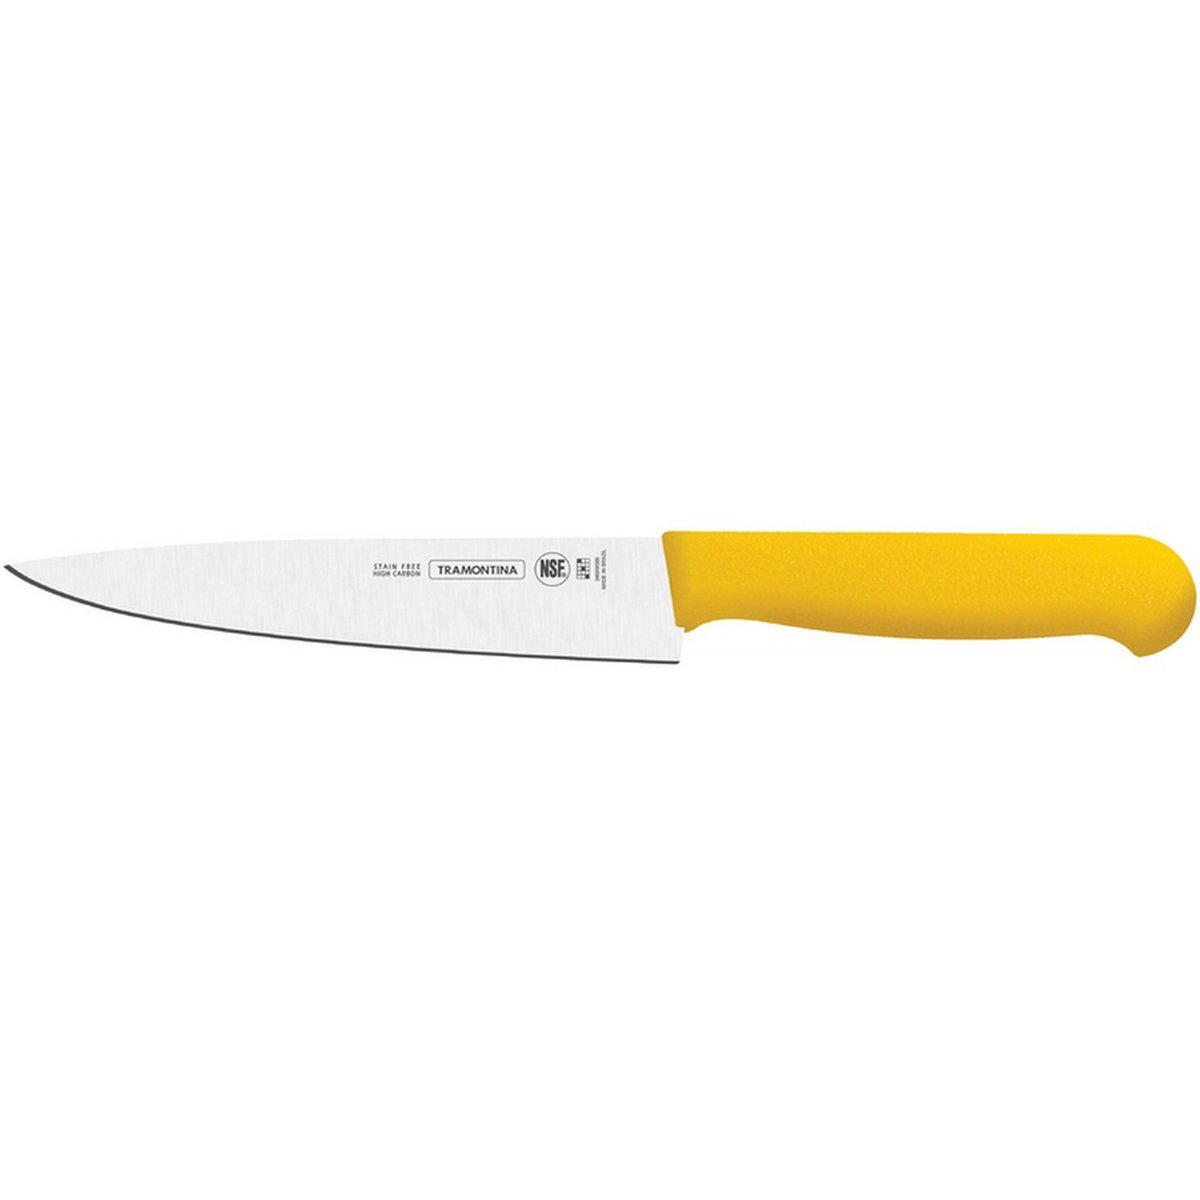 Tramontina Meat Knife YW-24620/150 10inch